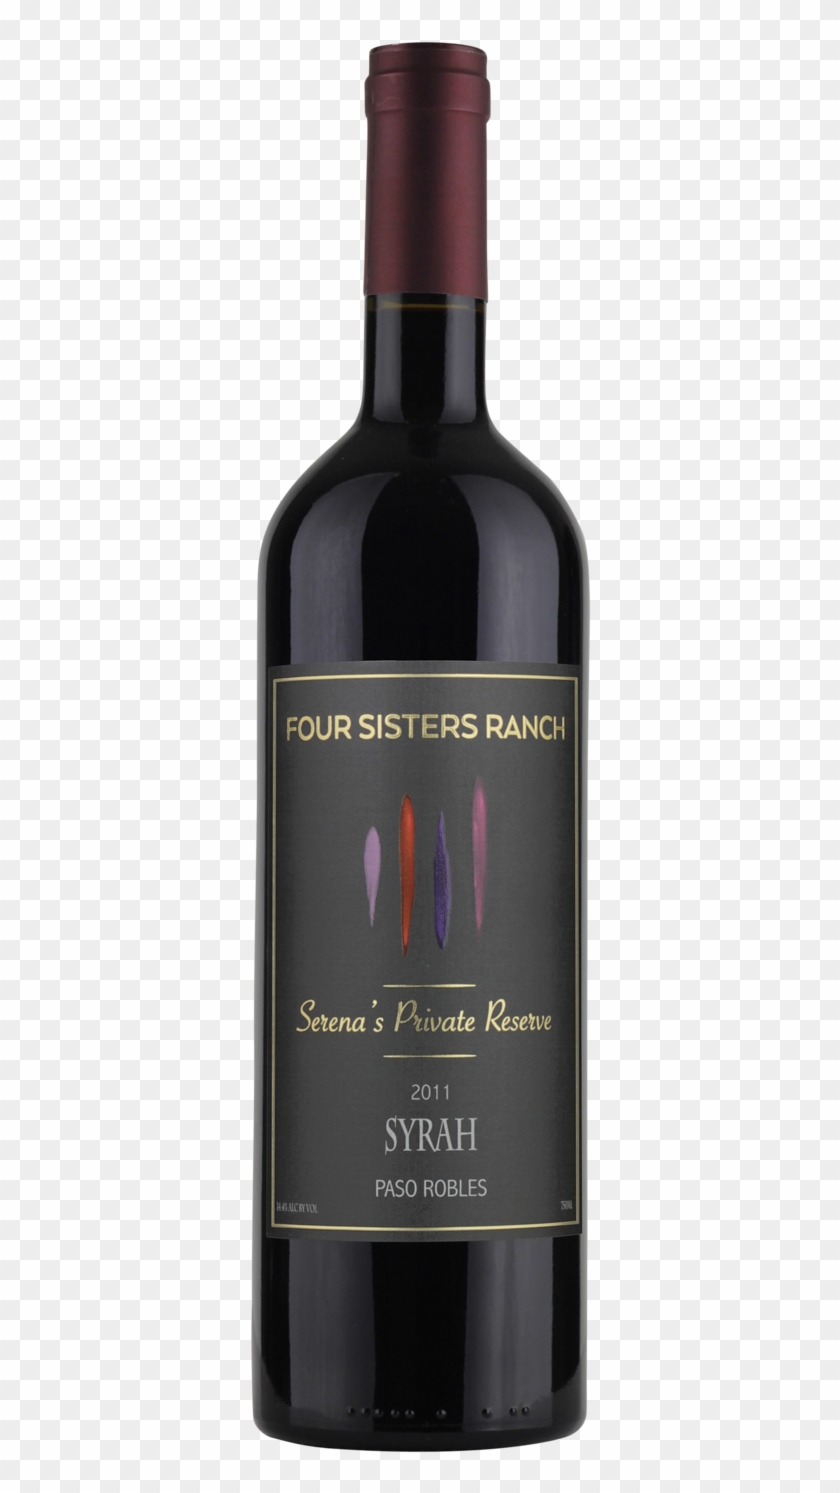 2011 Serena's Private Reserve Syrah Four Sisters Ranch - American Crew Daily Shampoo 100ml Clipart #3348794